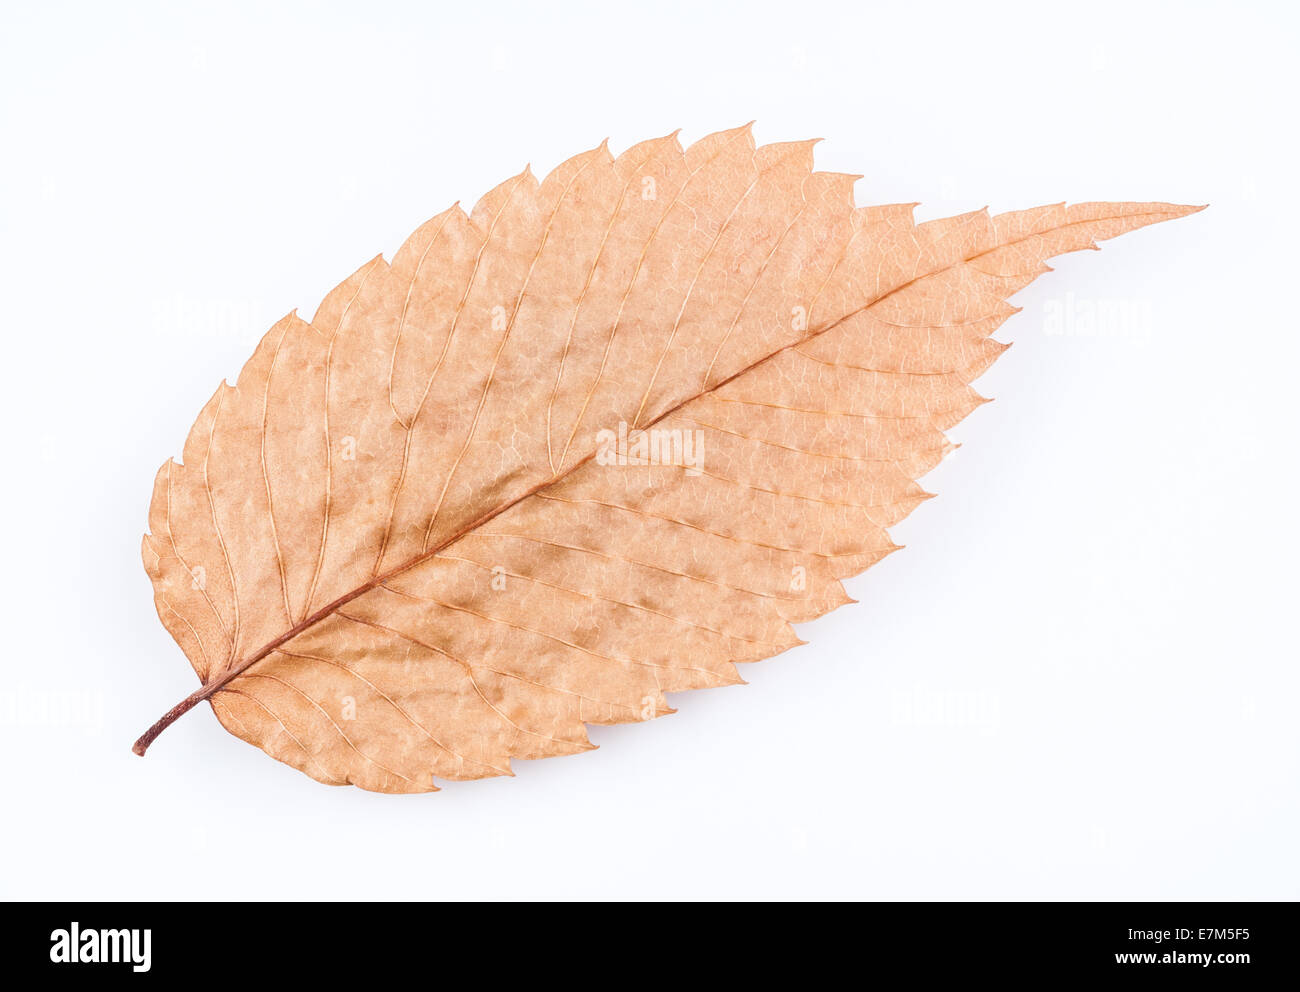 A closeup image of an old dry leaf. The beautiful patterns of the veins are visible in this pressed leaf. Stock Photo